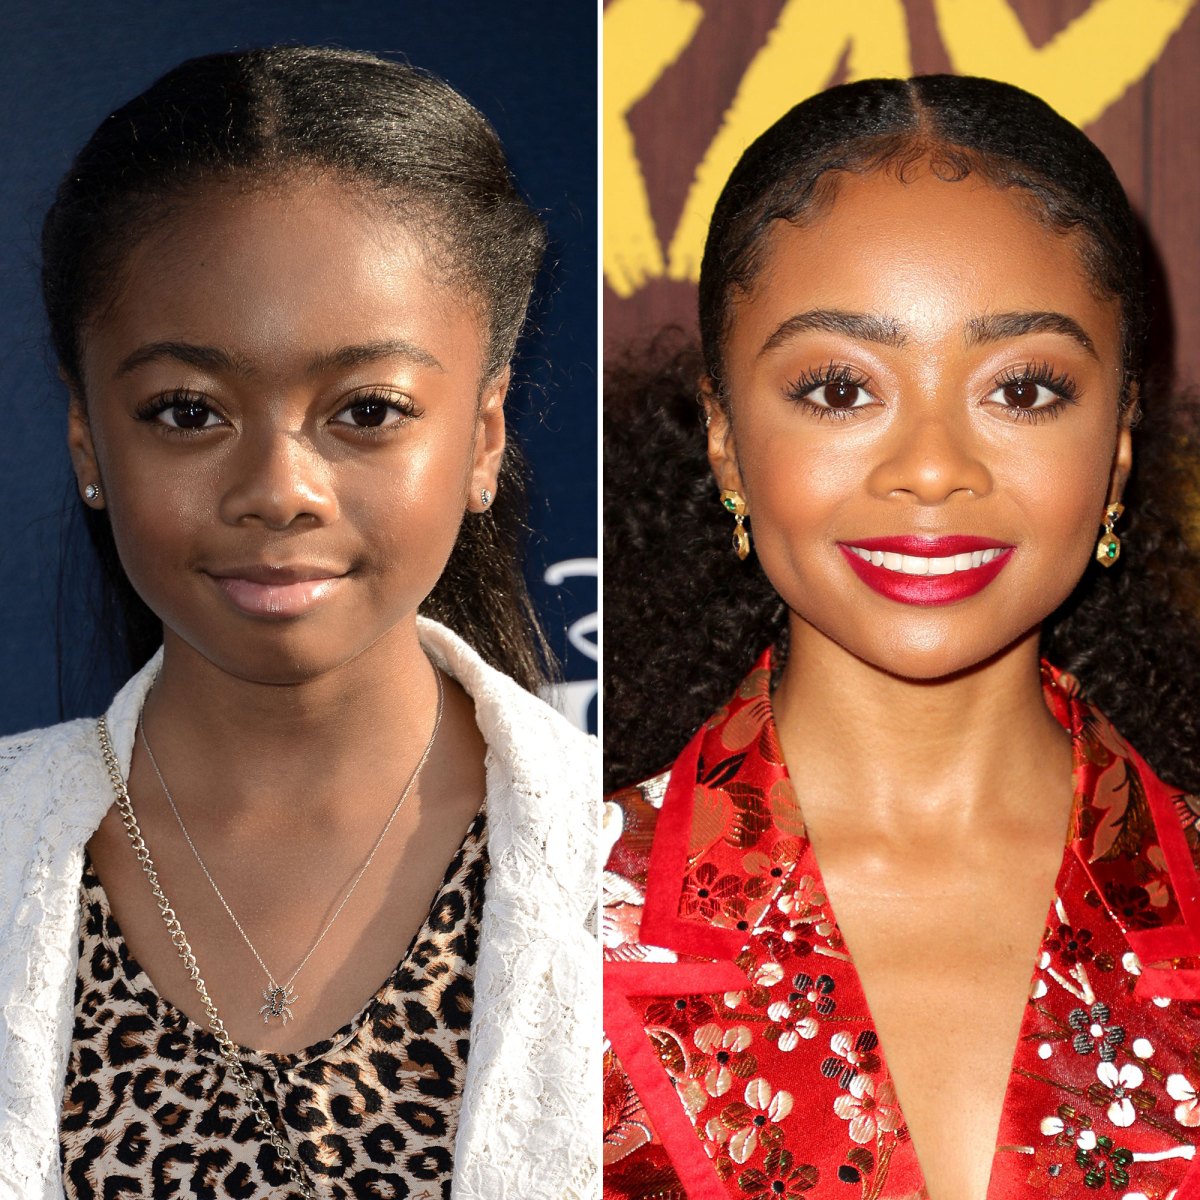 https://www.lifeandstylemag.com/wp-content/uploads/2021/04/Skai-Jackson-Favorite-Disney-Channel-Stars-Then-and-Now.jpg?resize=1200%2C1200&quality=86&strip=all